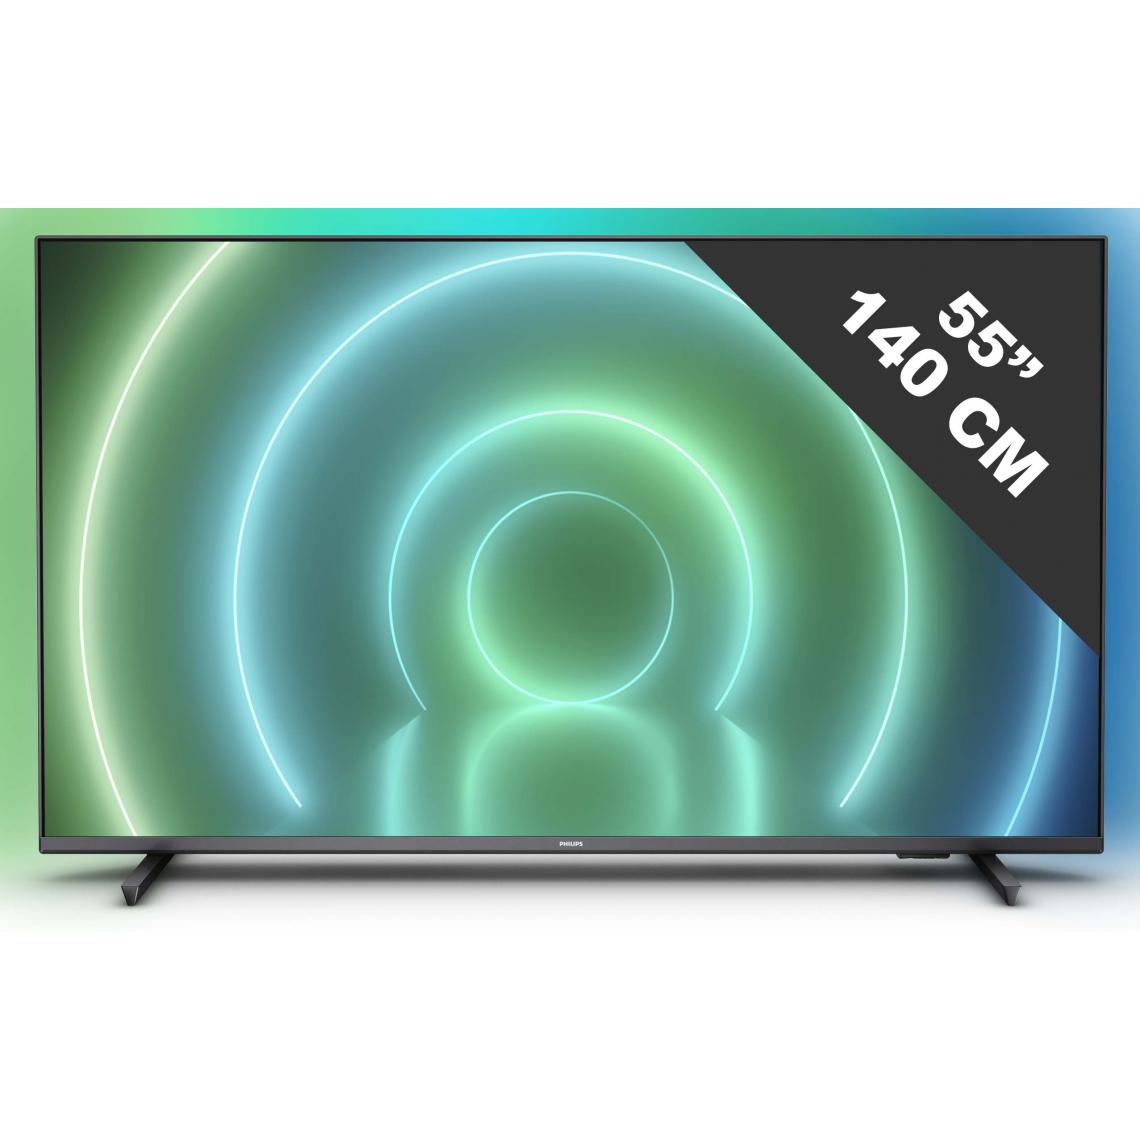 Philips - PHILIPS 55PUS7906 TV LED UHD 4K - 55 (139cm) - Ambilight 3 côtés - Dolby Vision - son Dolby Atmos - Android TV Compatible HDMI 2.1 - TV 50'' à 55''